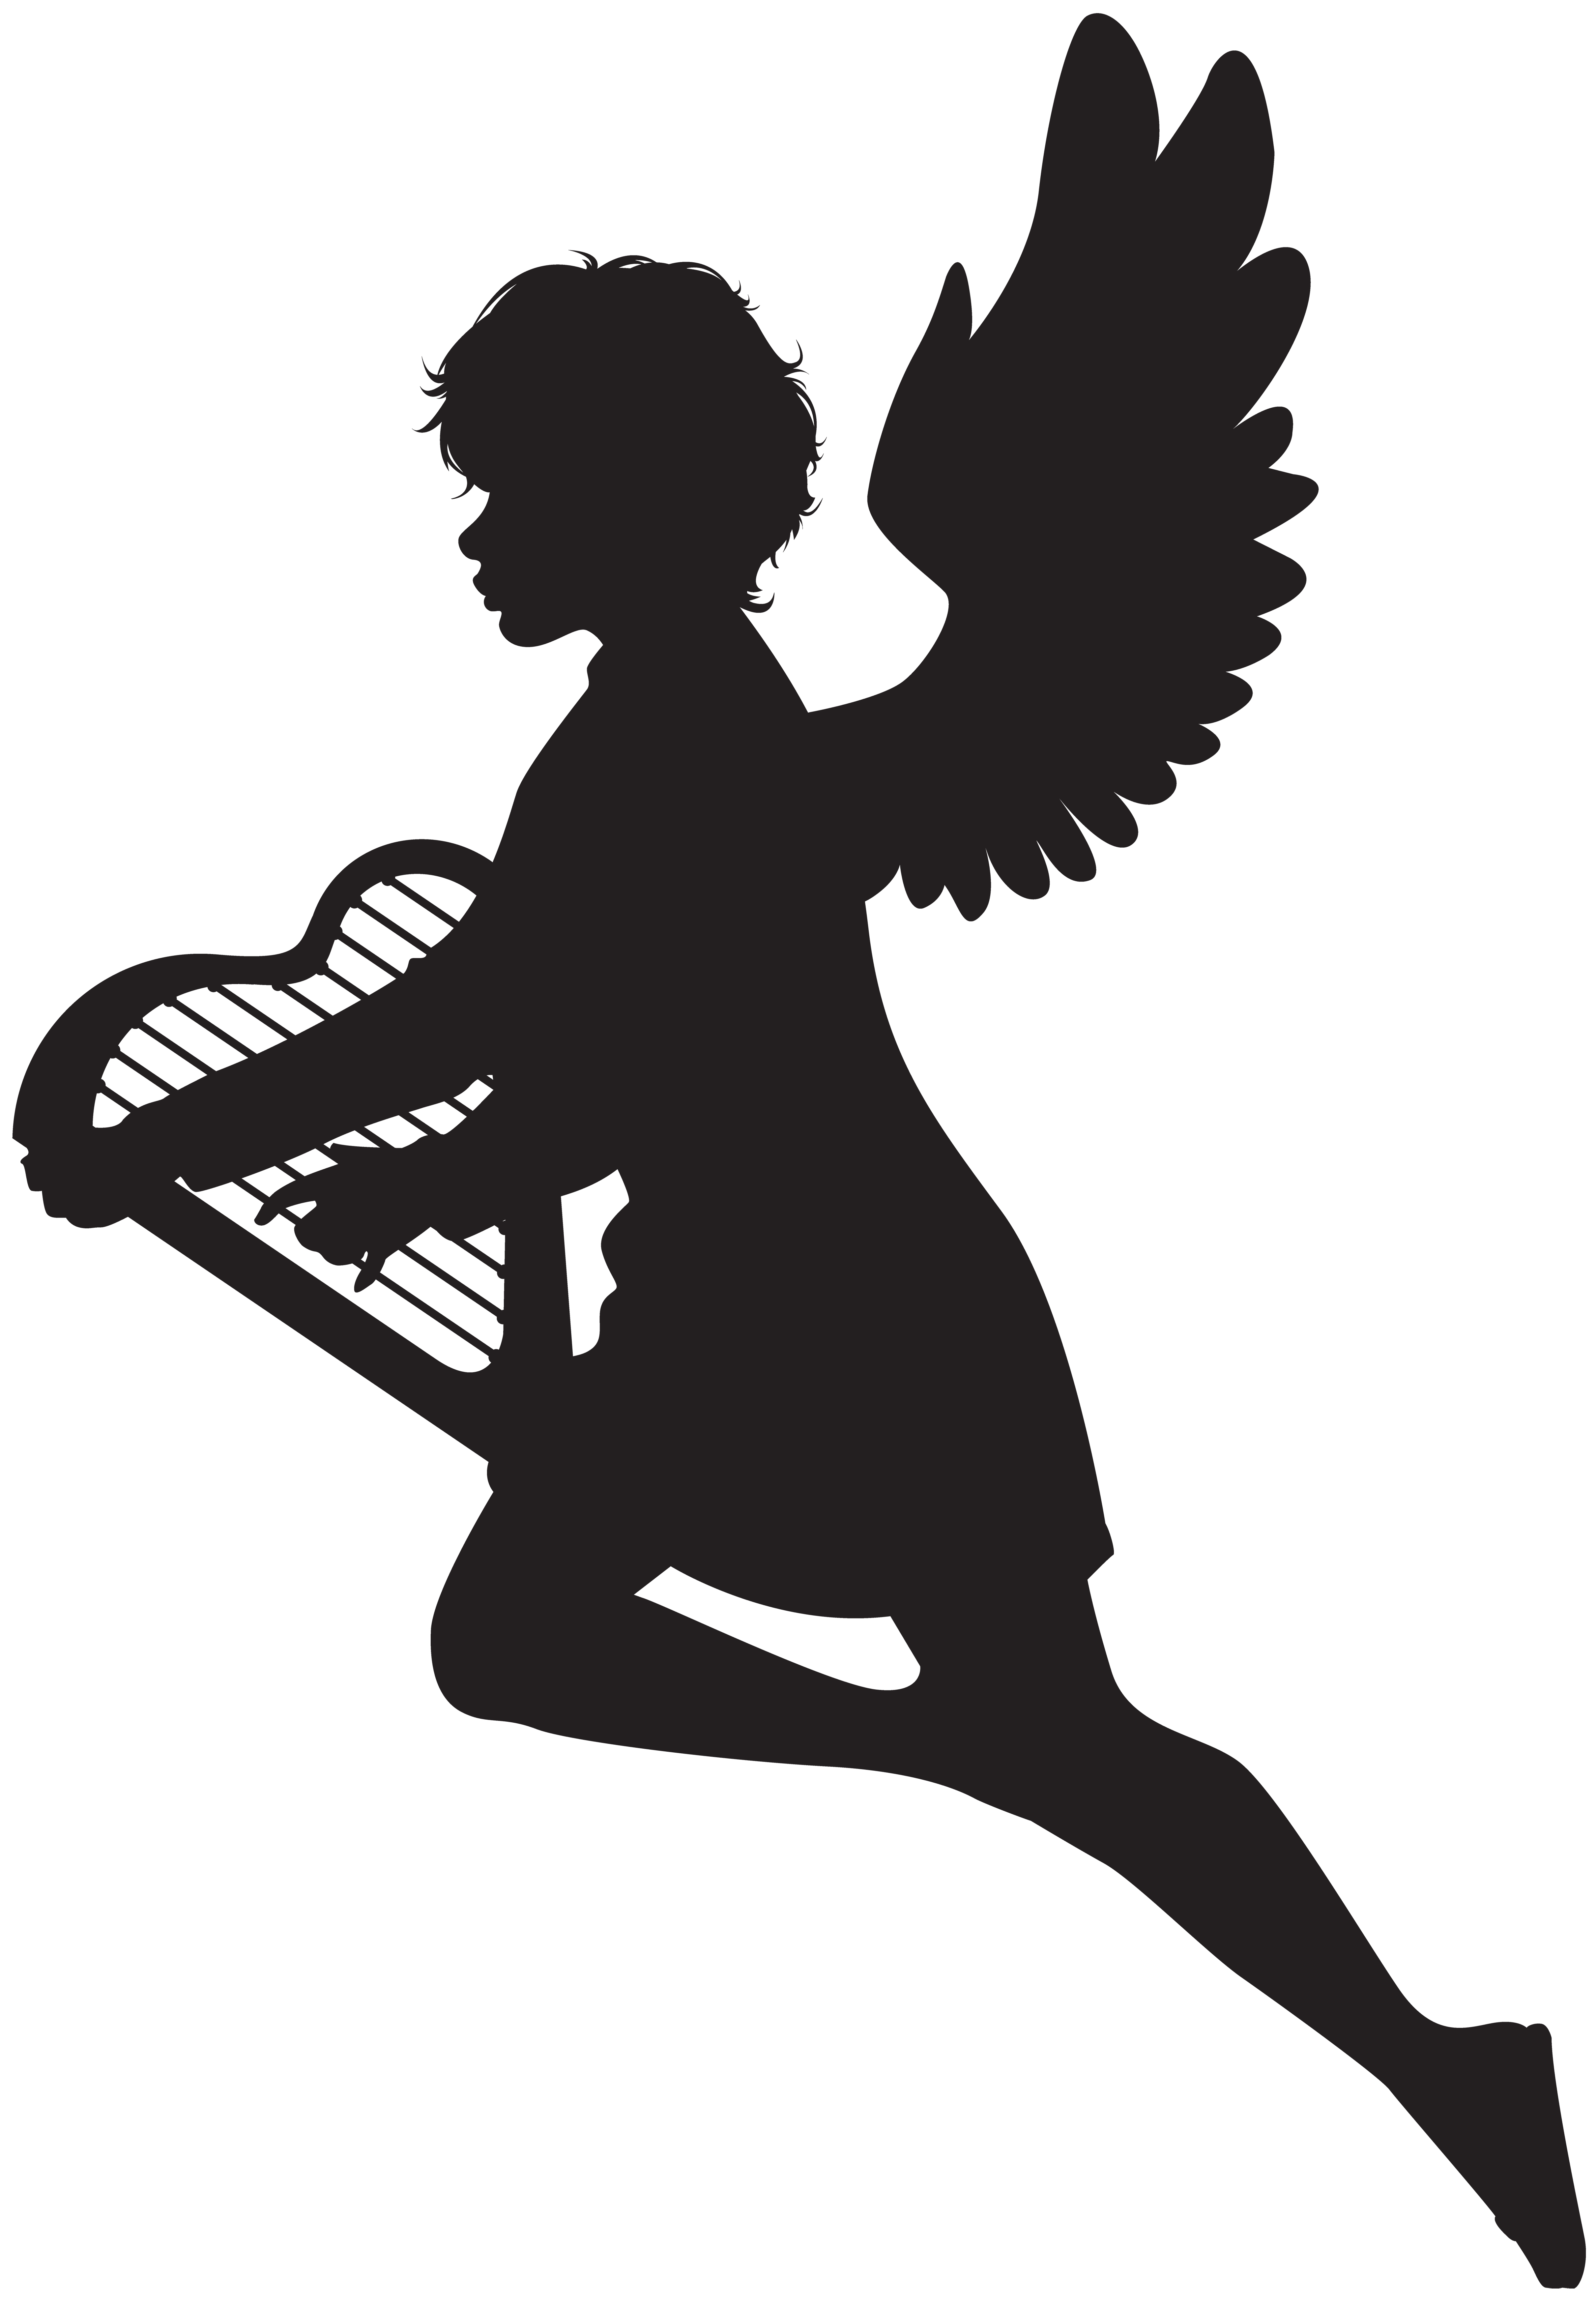 clipart angel silhouette